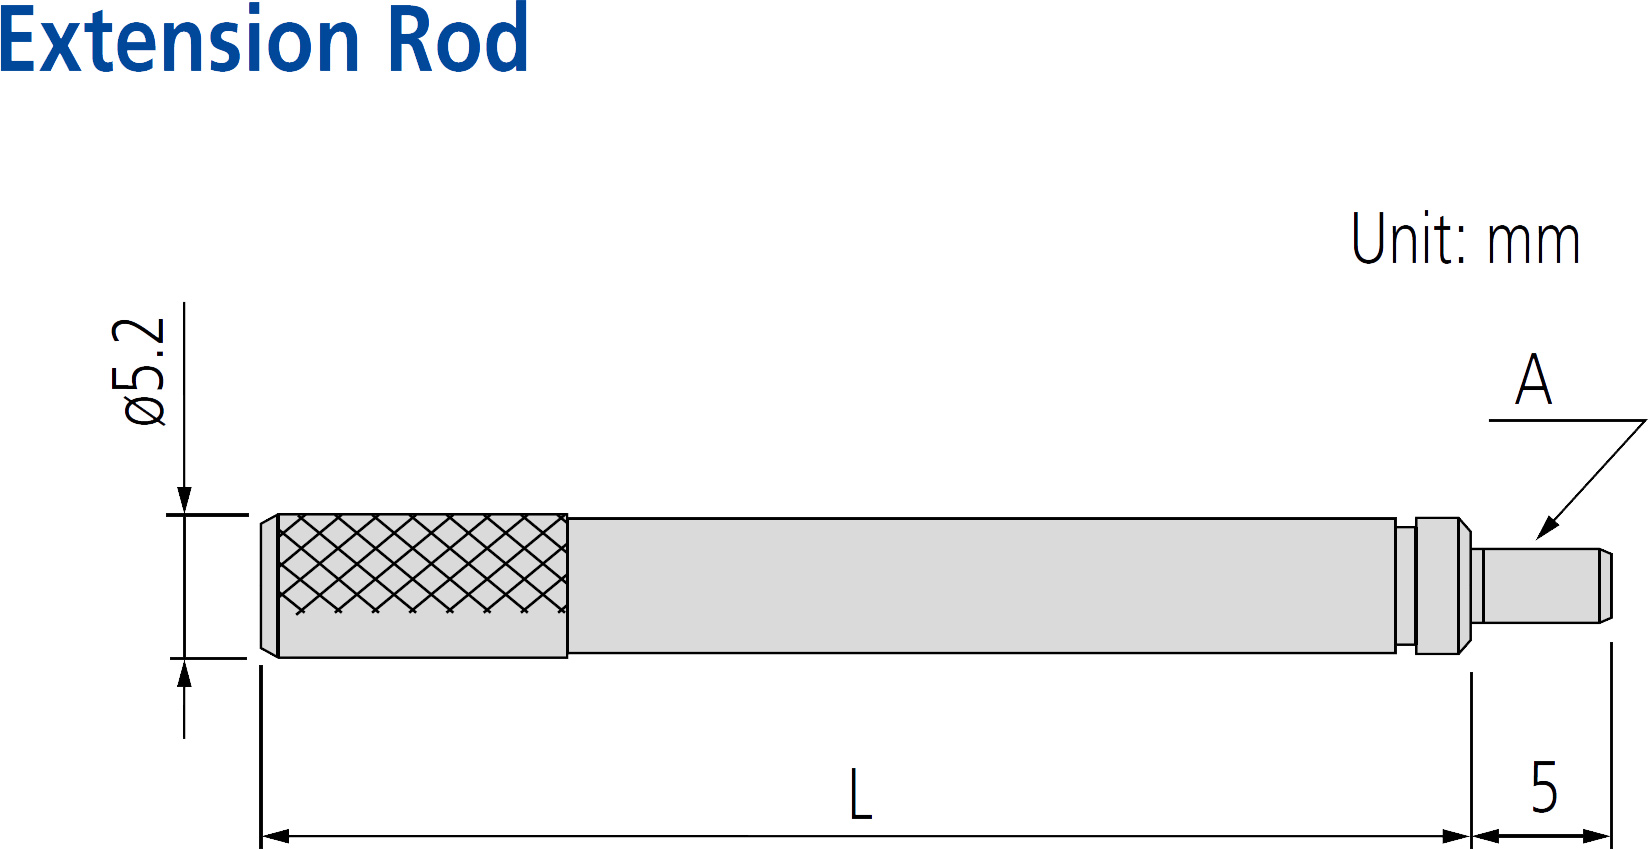 Mitutoyo Extension Rod dimensions.